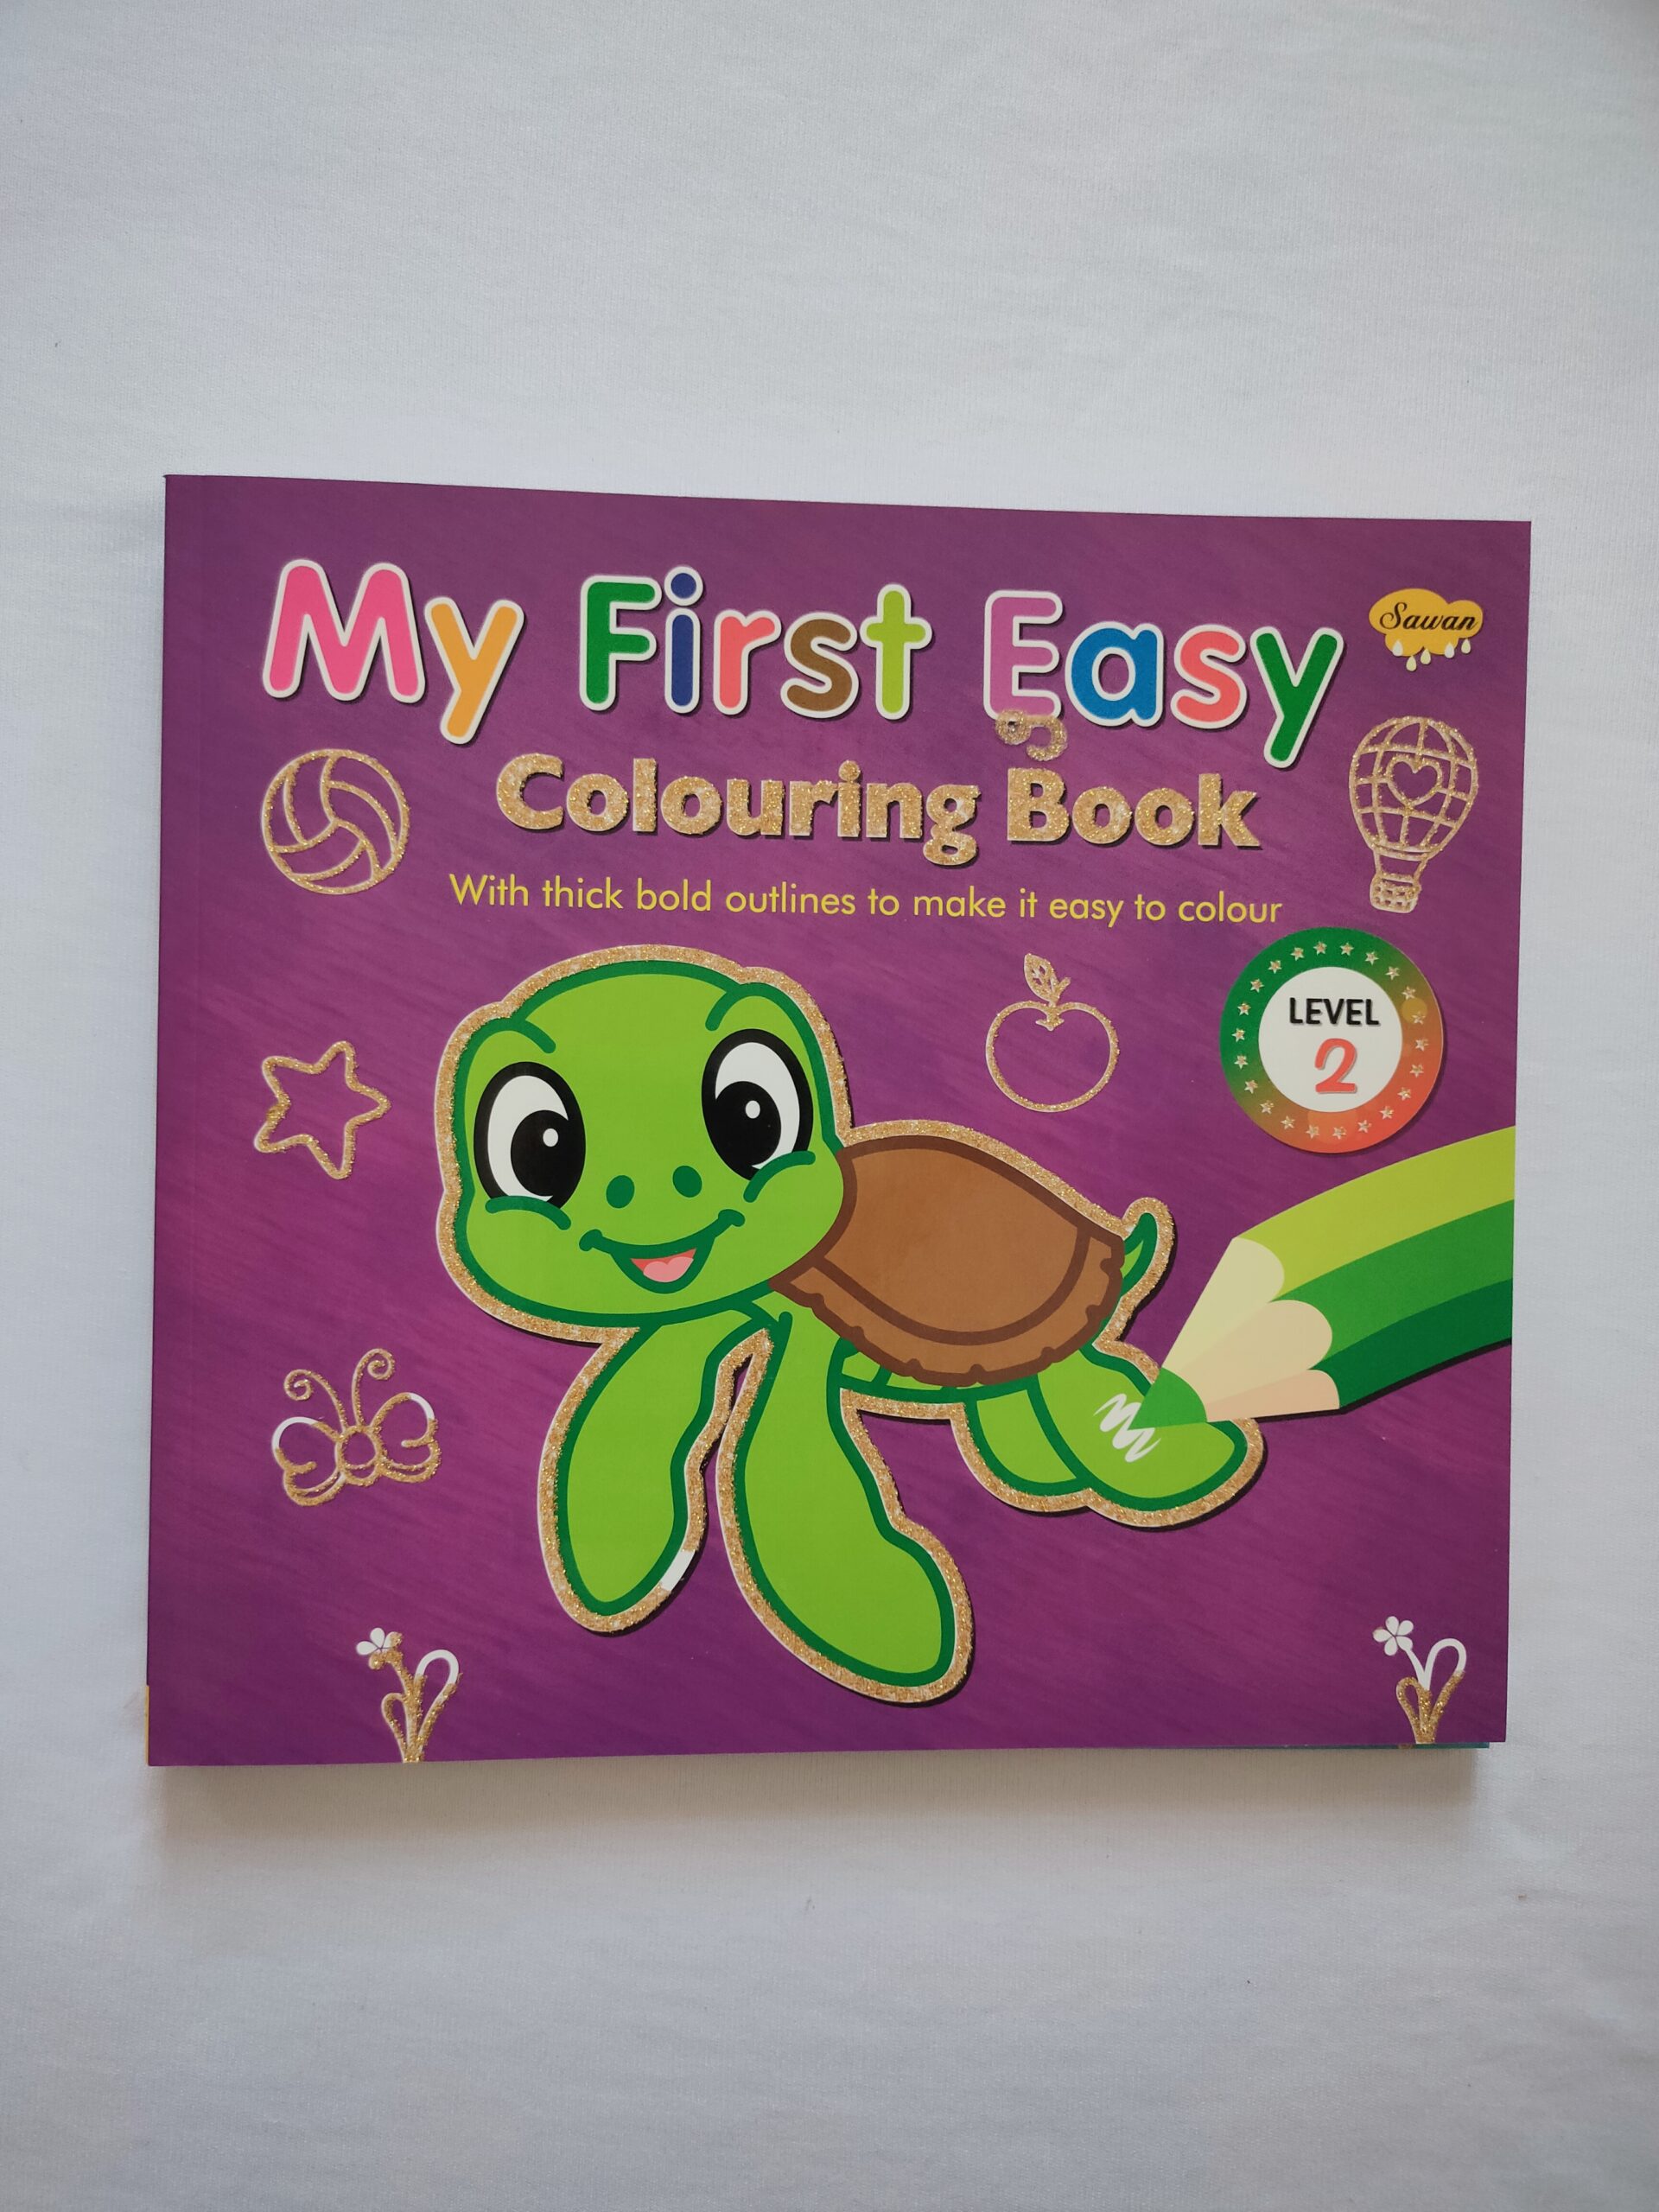 My first easy colouring book 2